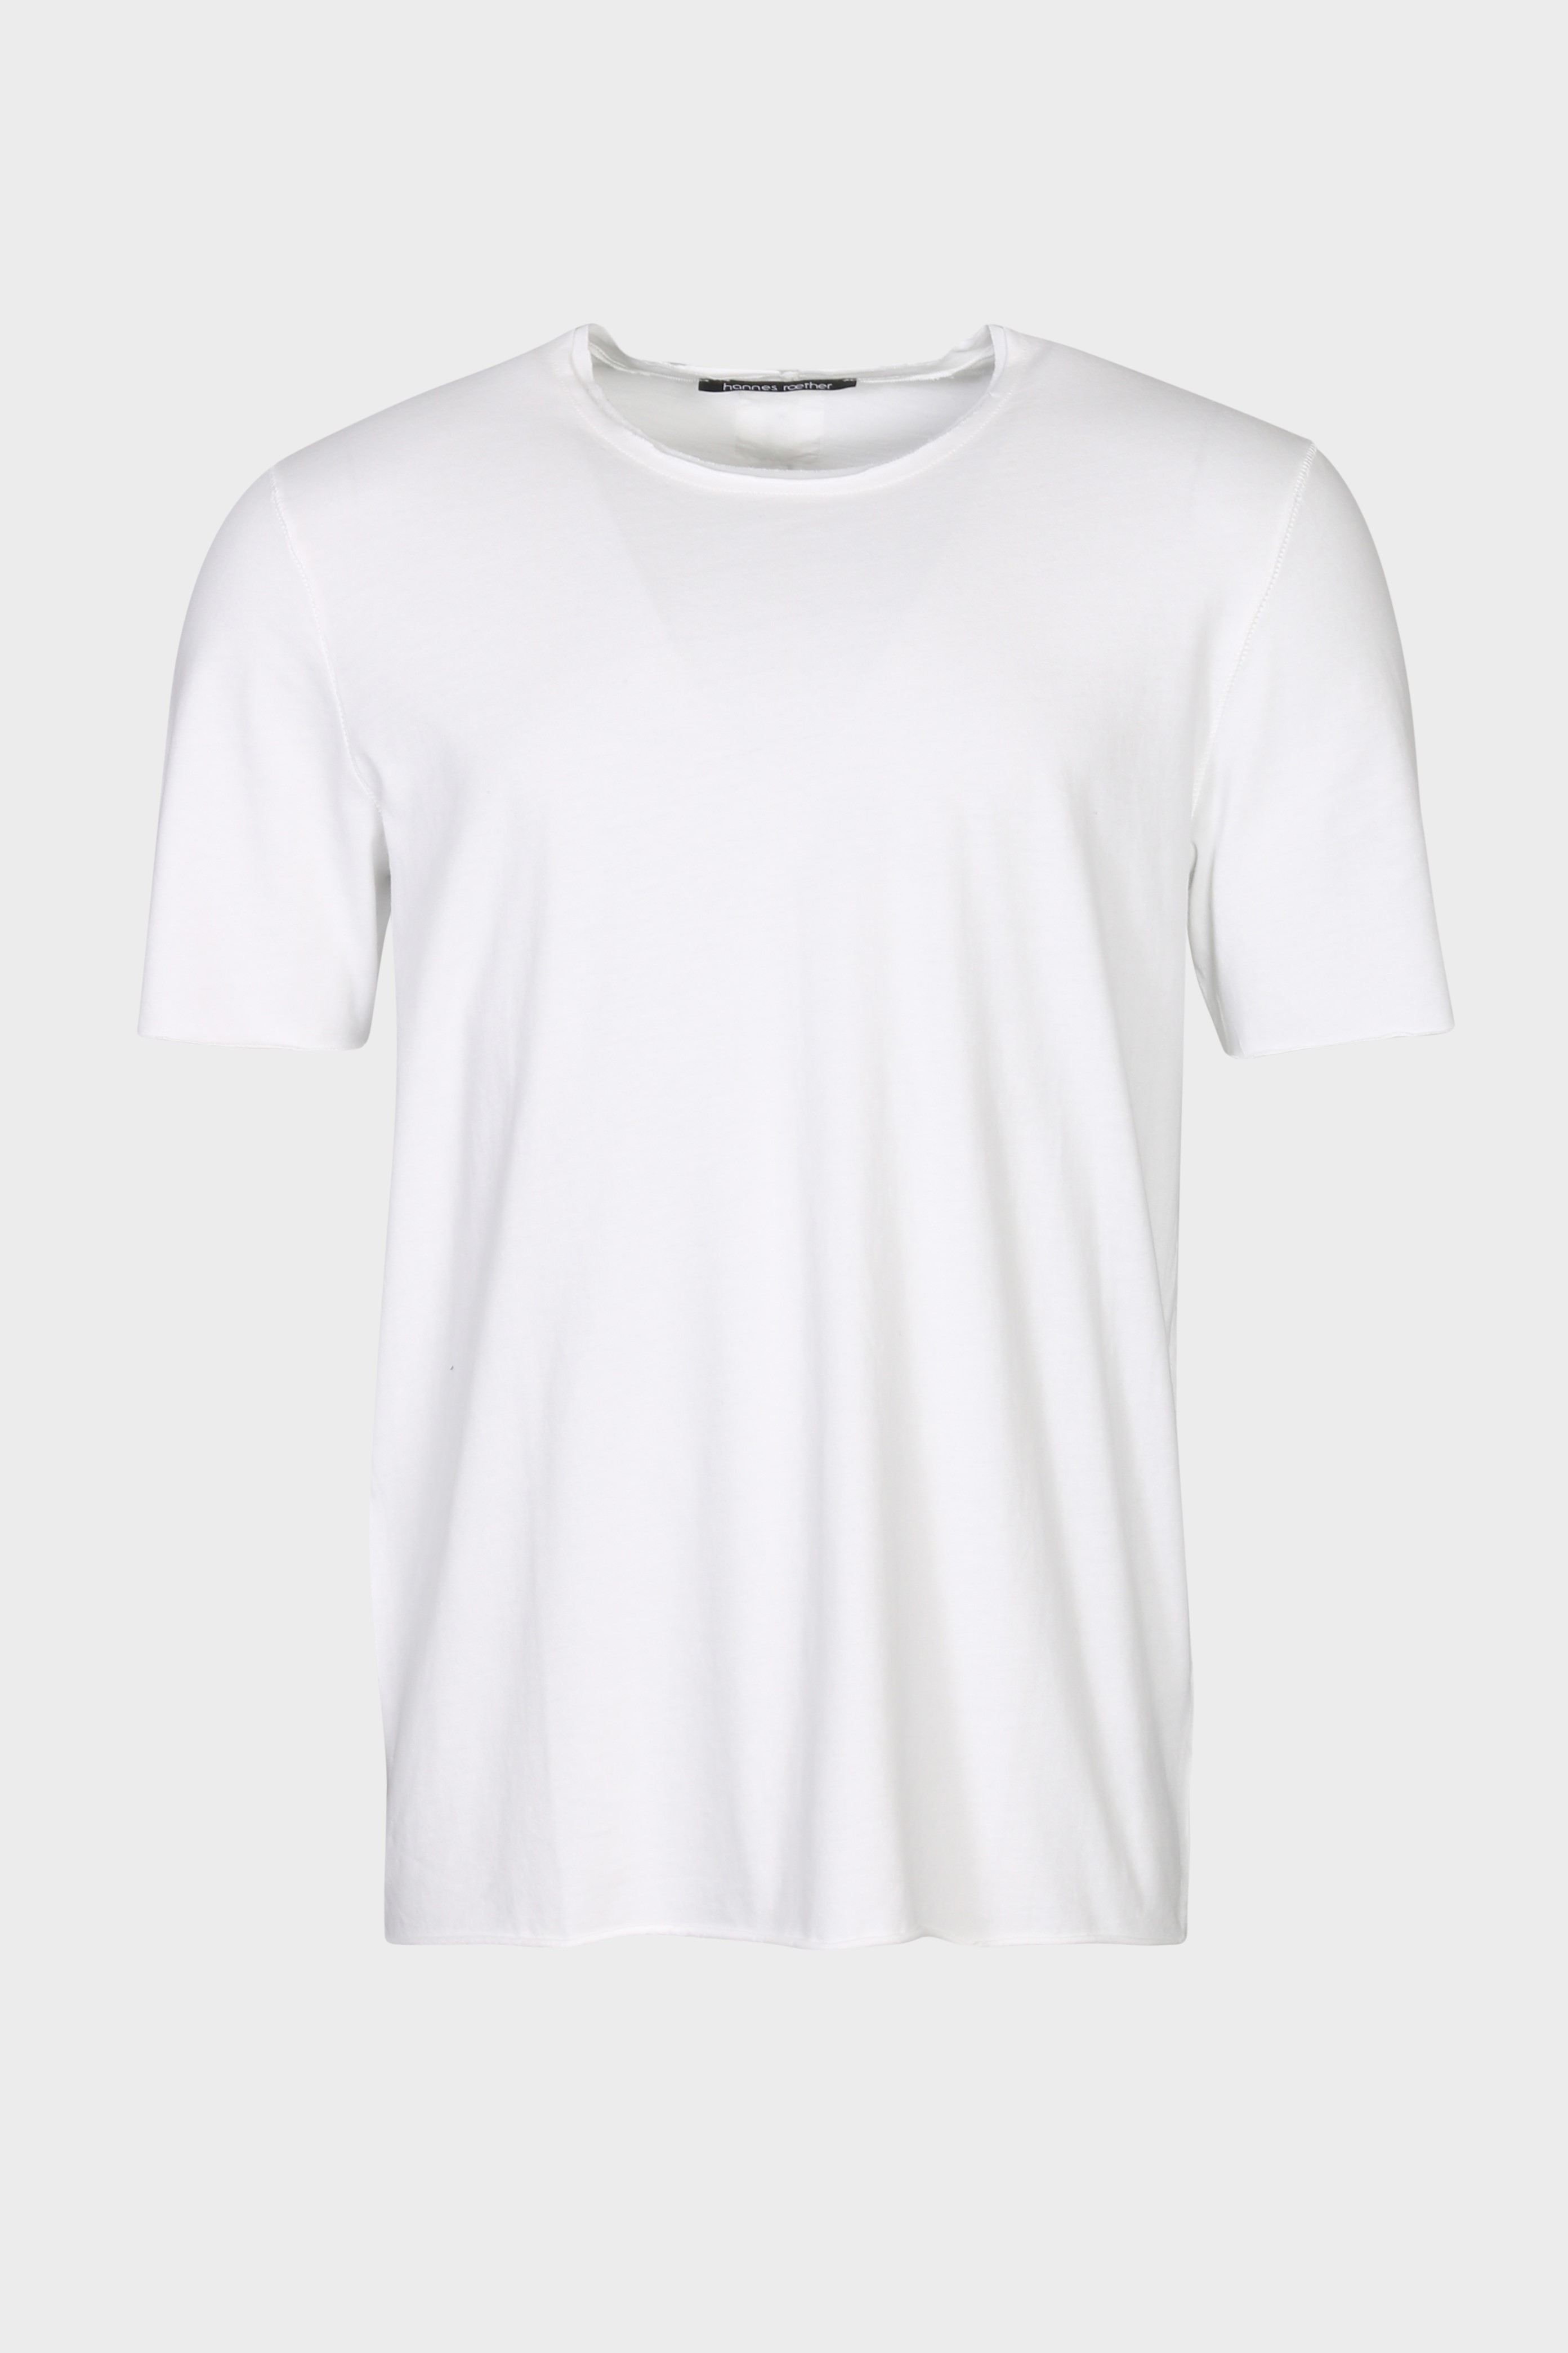 HANNES ROETHER T-Shirt in White